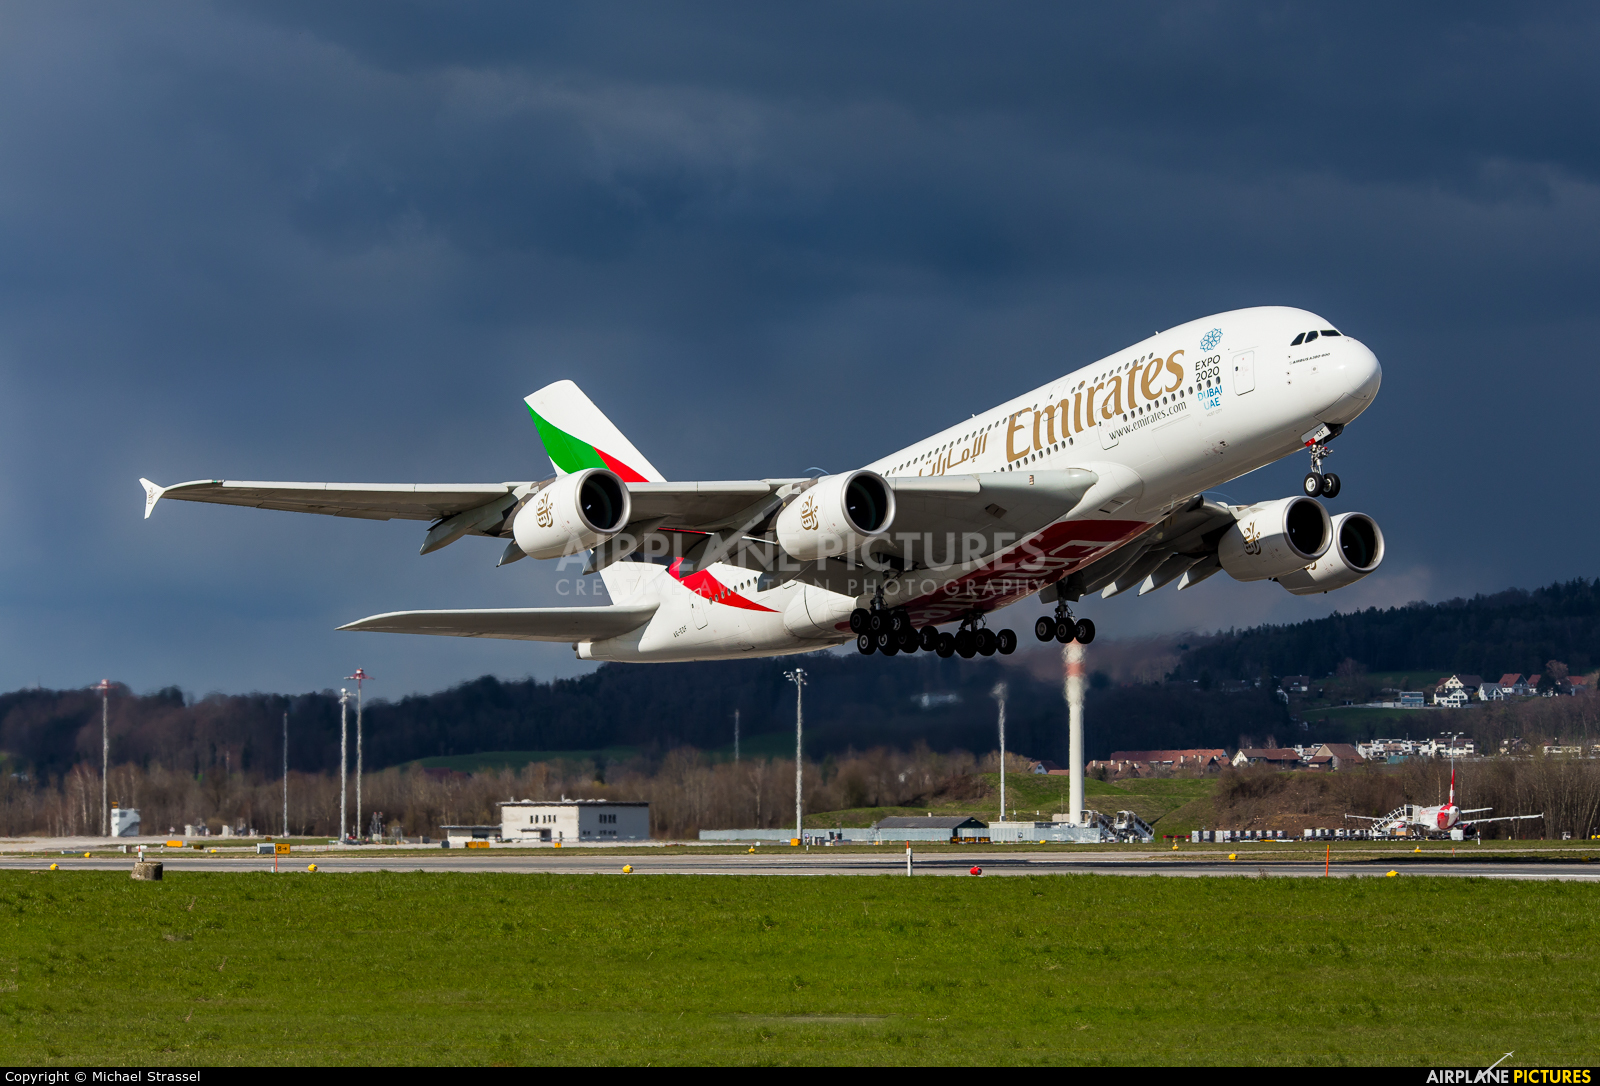 Emirates Airlines A6-EDF aircraft at Zurich